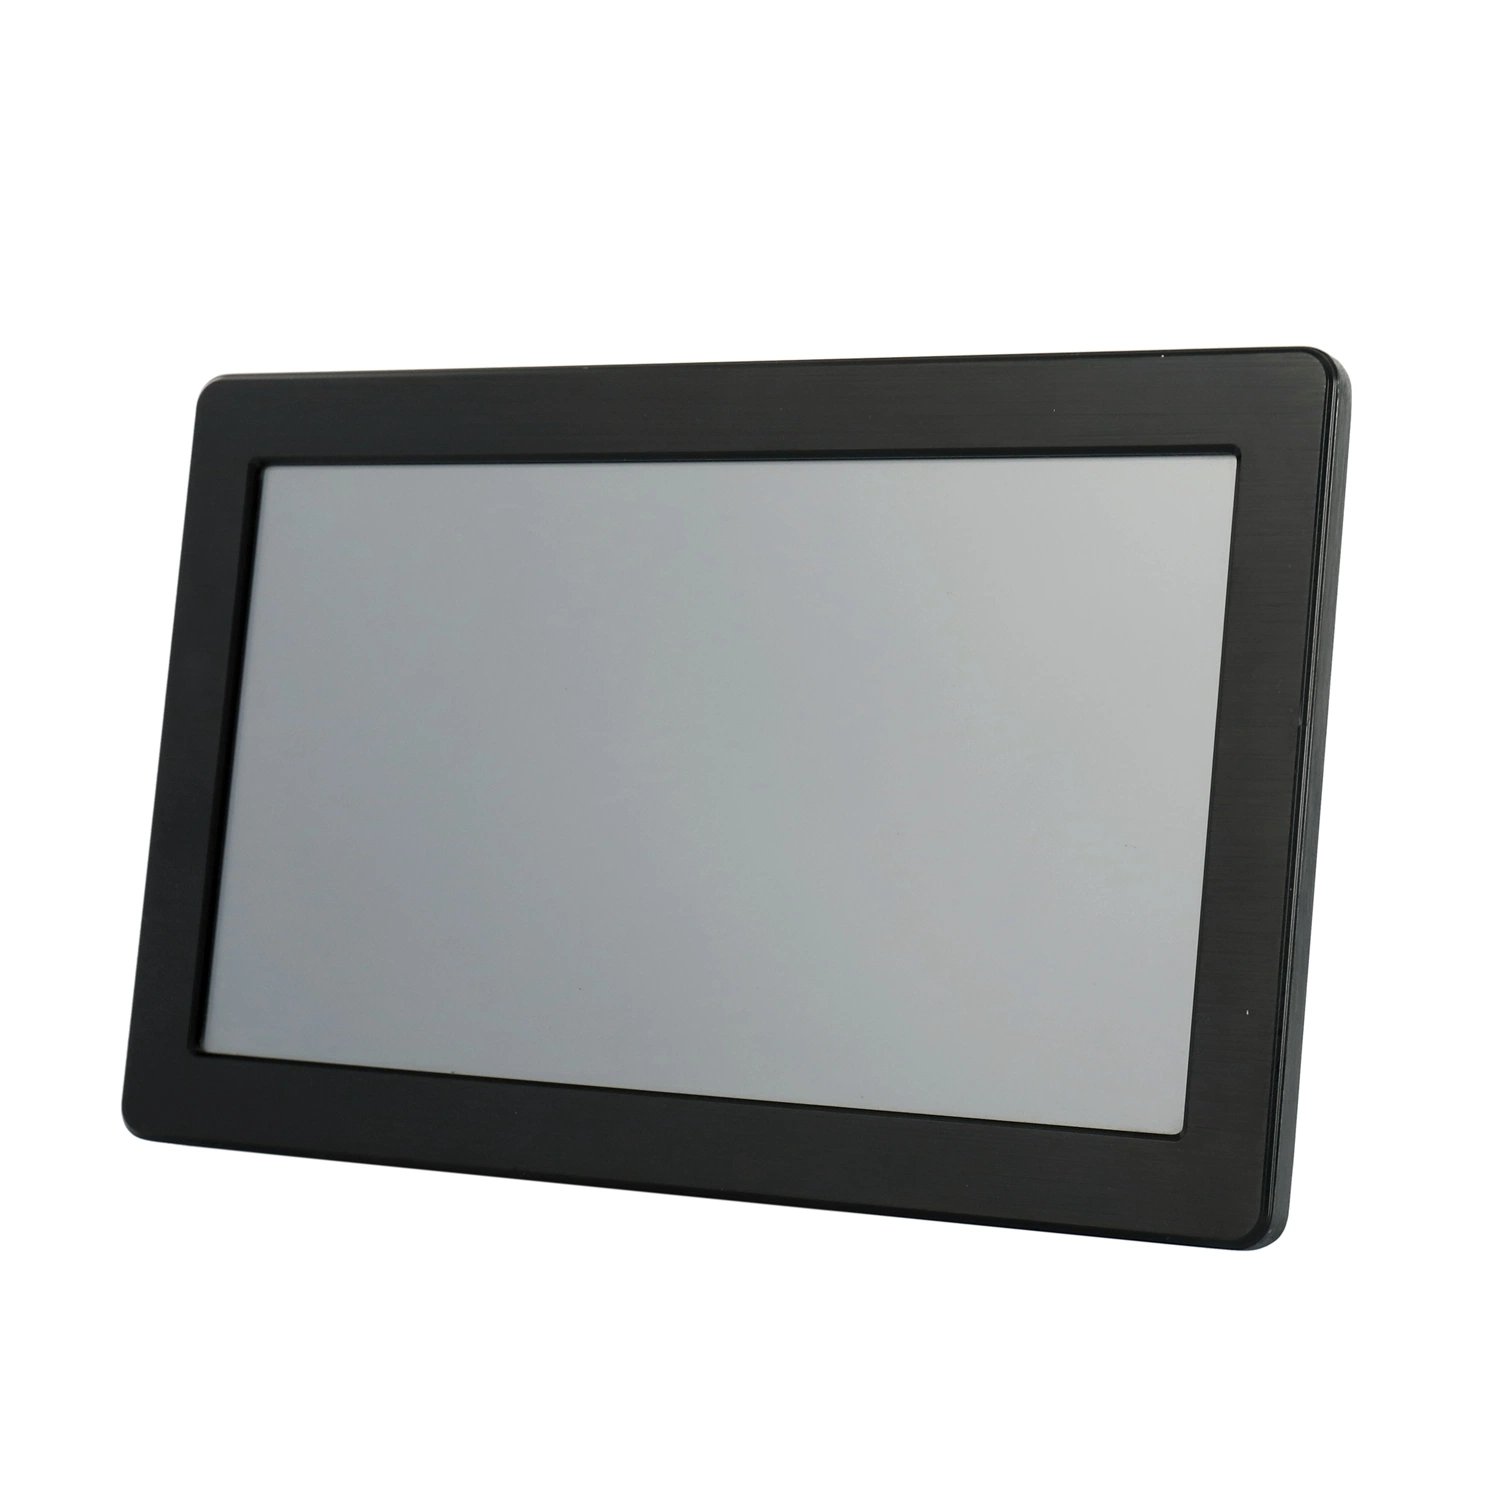 Industrial OEM 15.6 Inch Quad Core Inch Touch Screen Customer Feedback Restaurant Ordering Poe RJ45 NFC Camera All in One Desktop Android Display Screen